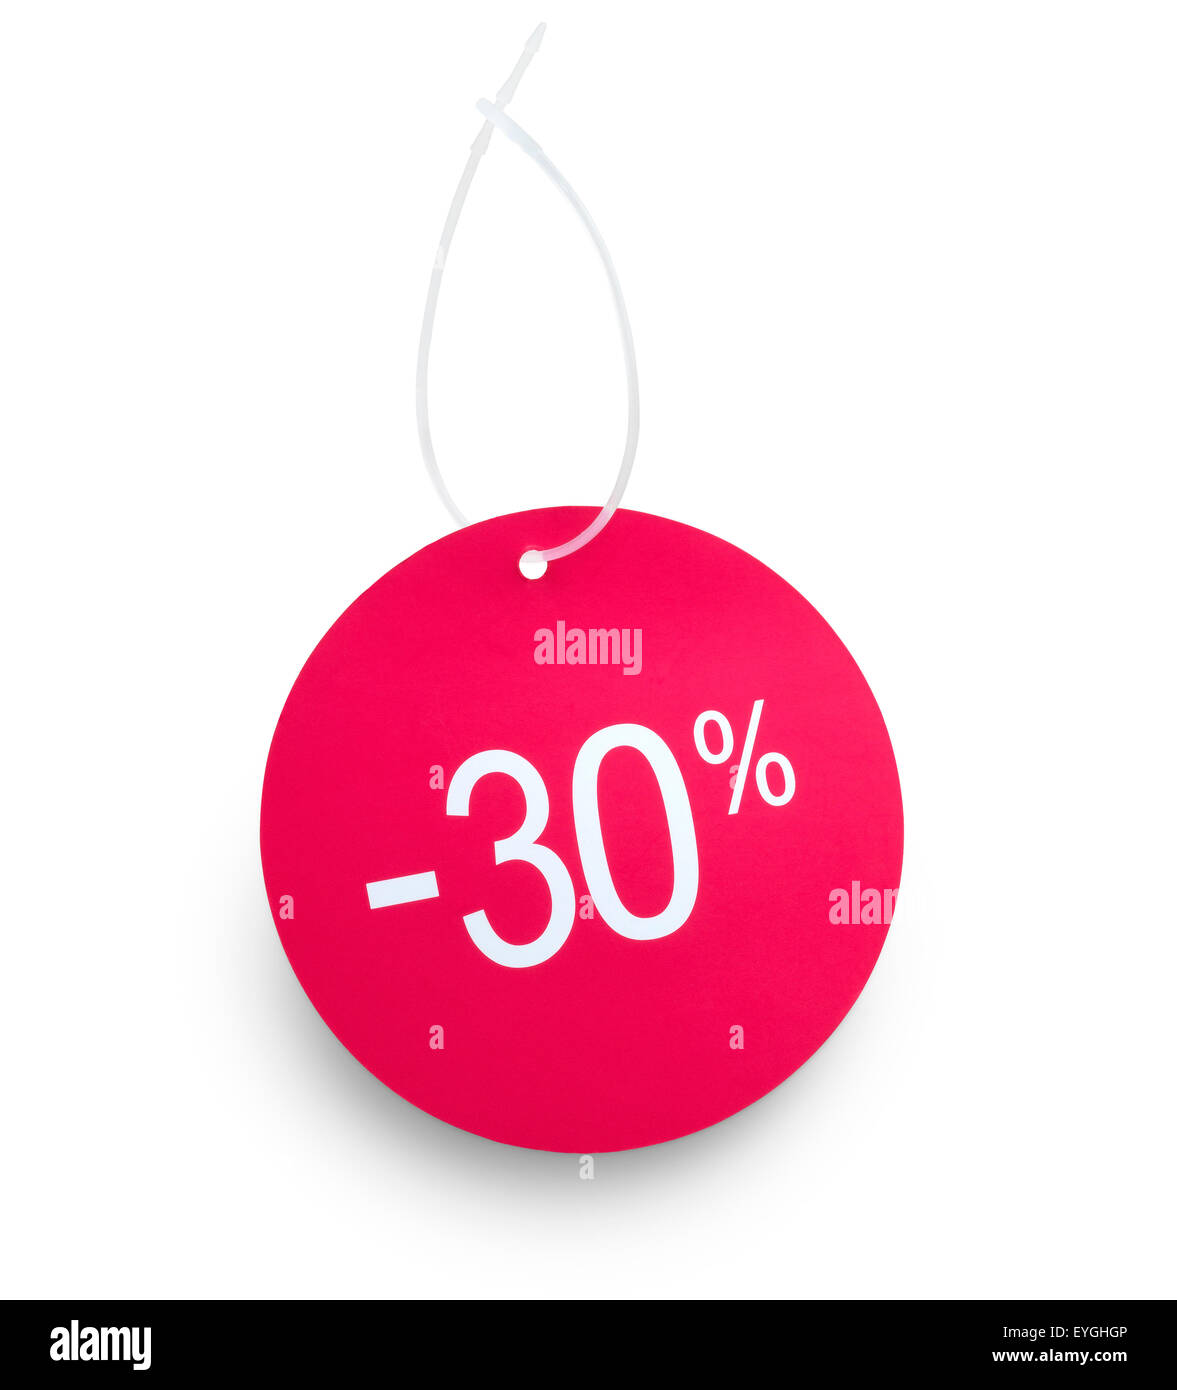 Discount tag 30% off against white background. Clipping path on tag and hanger tape Stock Photo